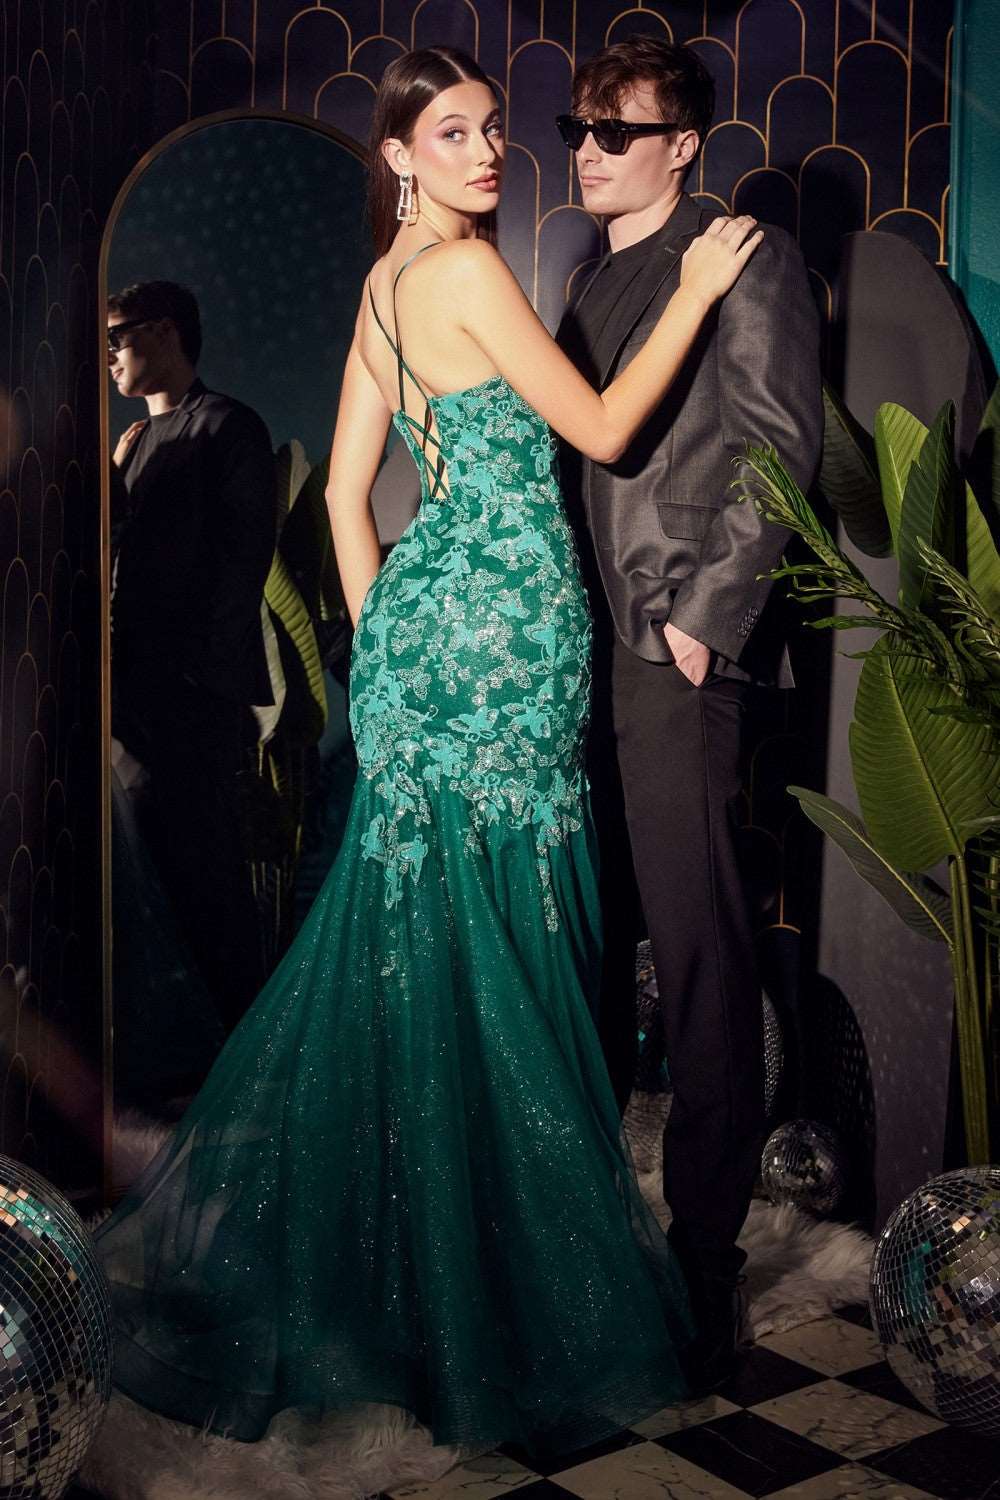 CD CB112 - Butterfly Print Mermaid Prom Gown with V-Neck & Layered Tulle Skirt PROM GOWN Cinderella Divine 4 EMERALD 